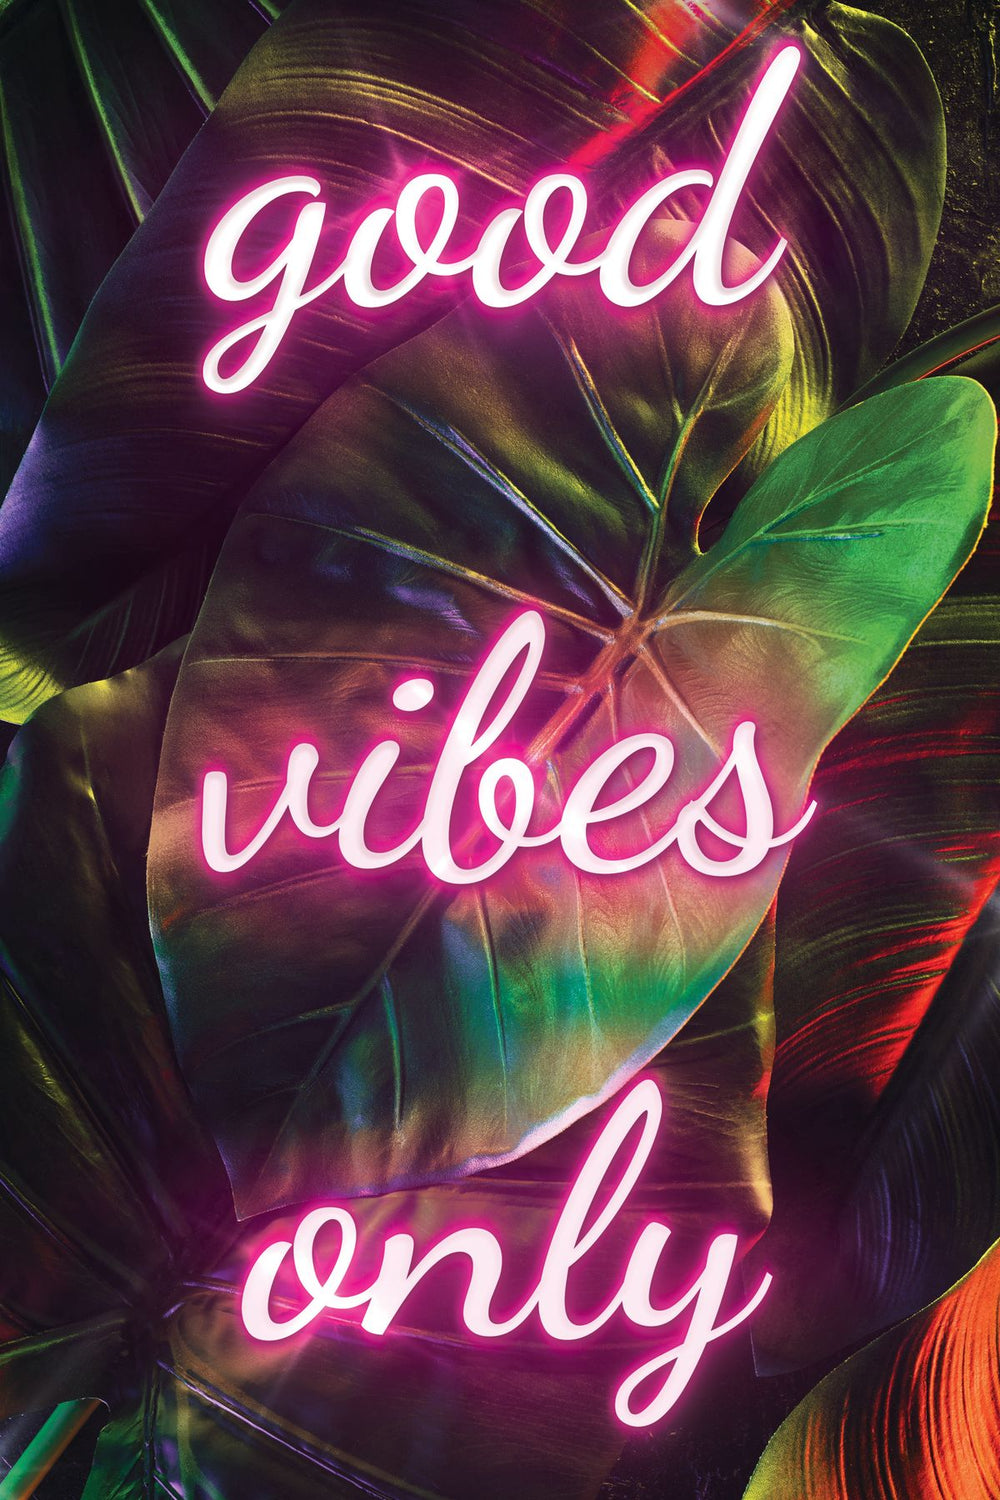 Good Vibes Only Neon